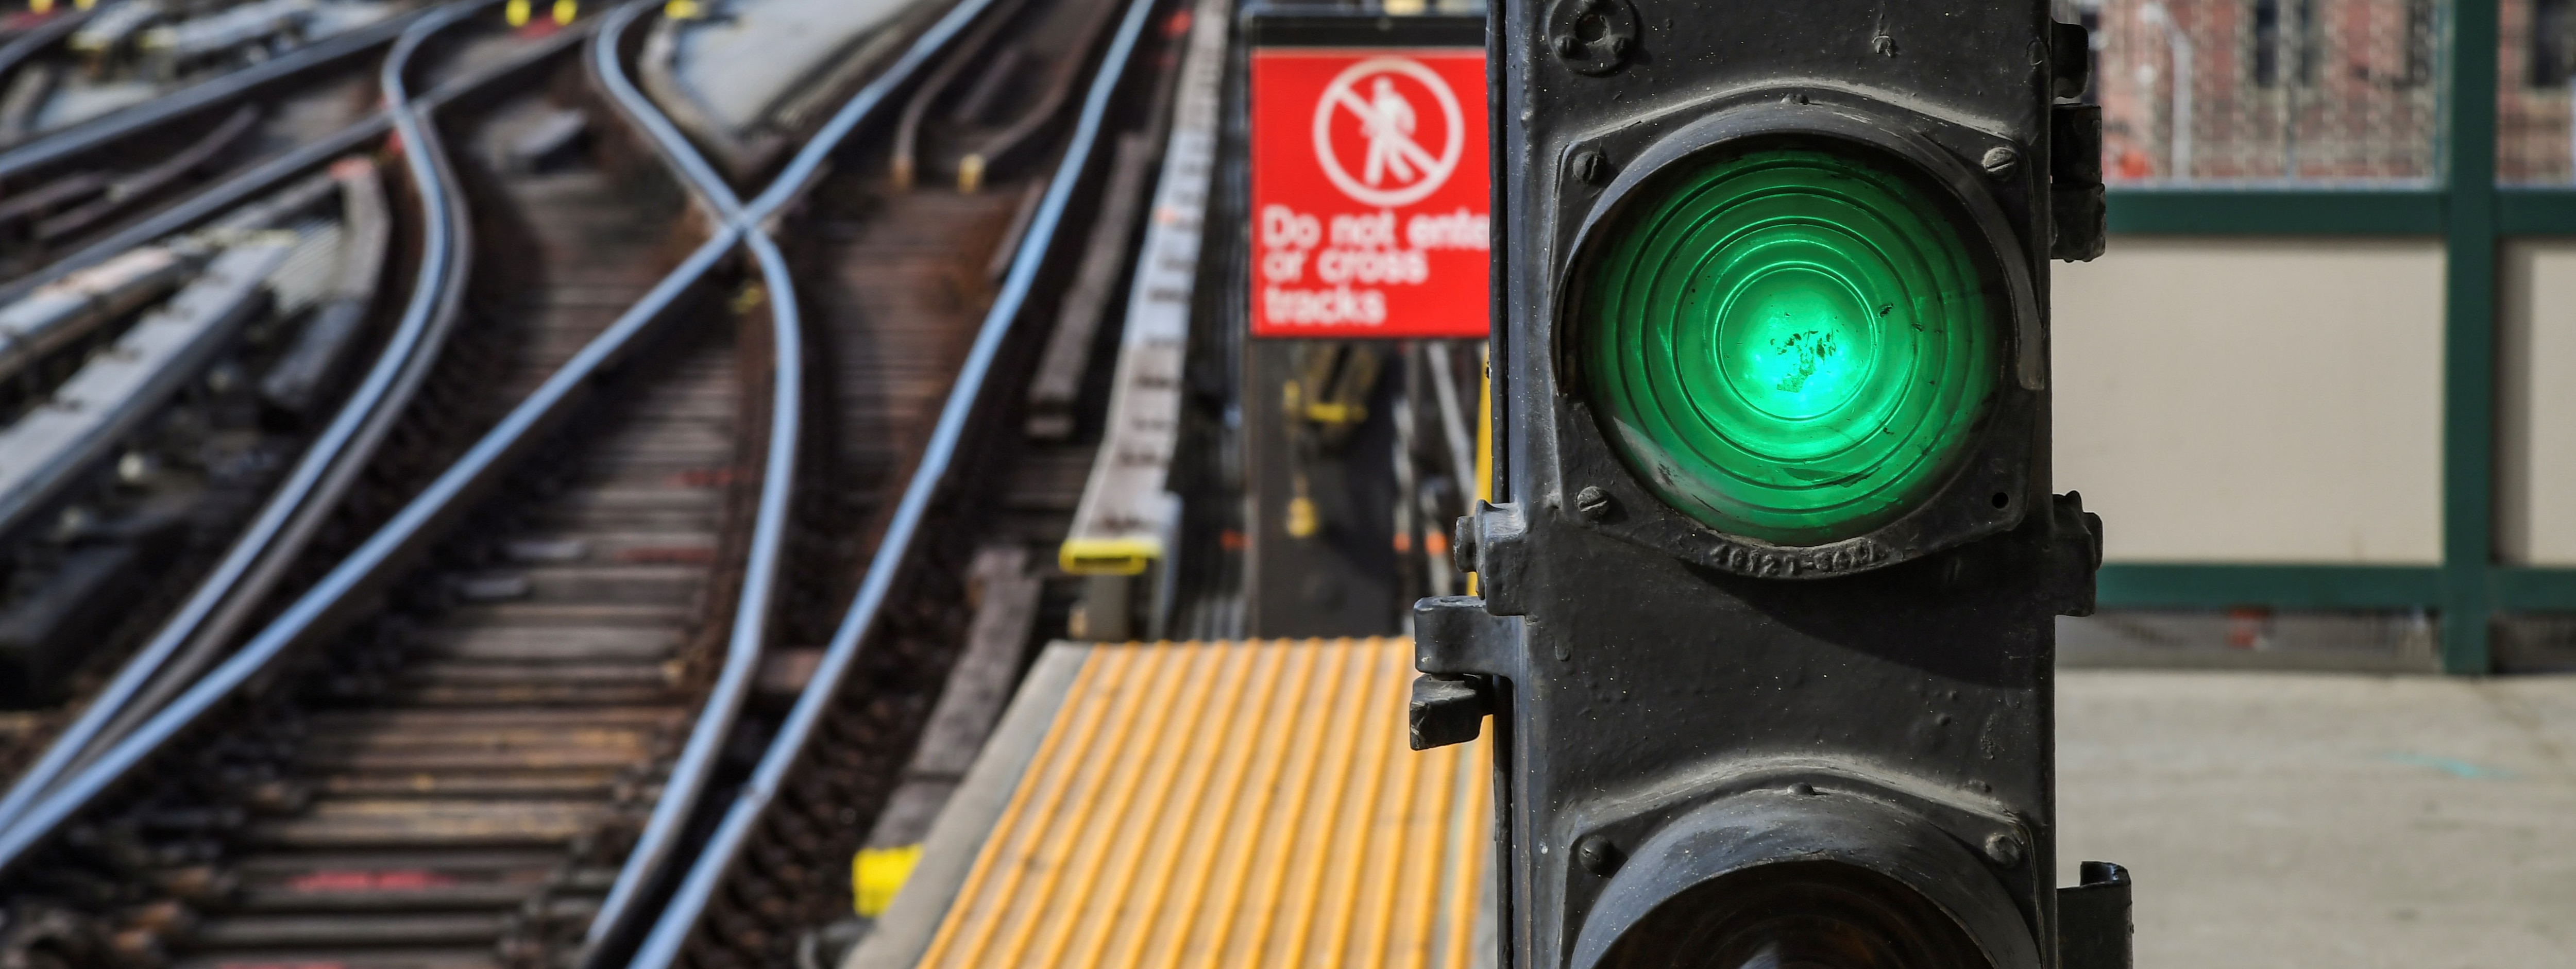 A green signal glows in the foreground of an image, with elevated subway tracks visible in the background. 